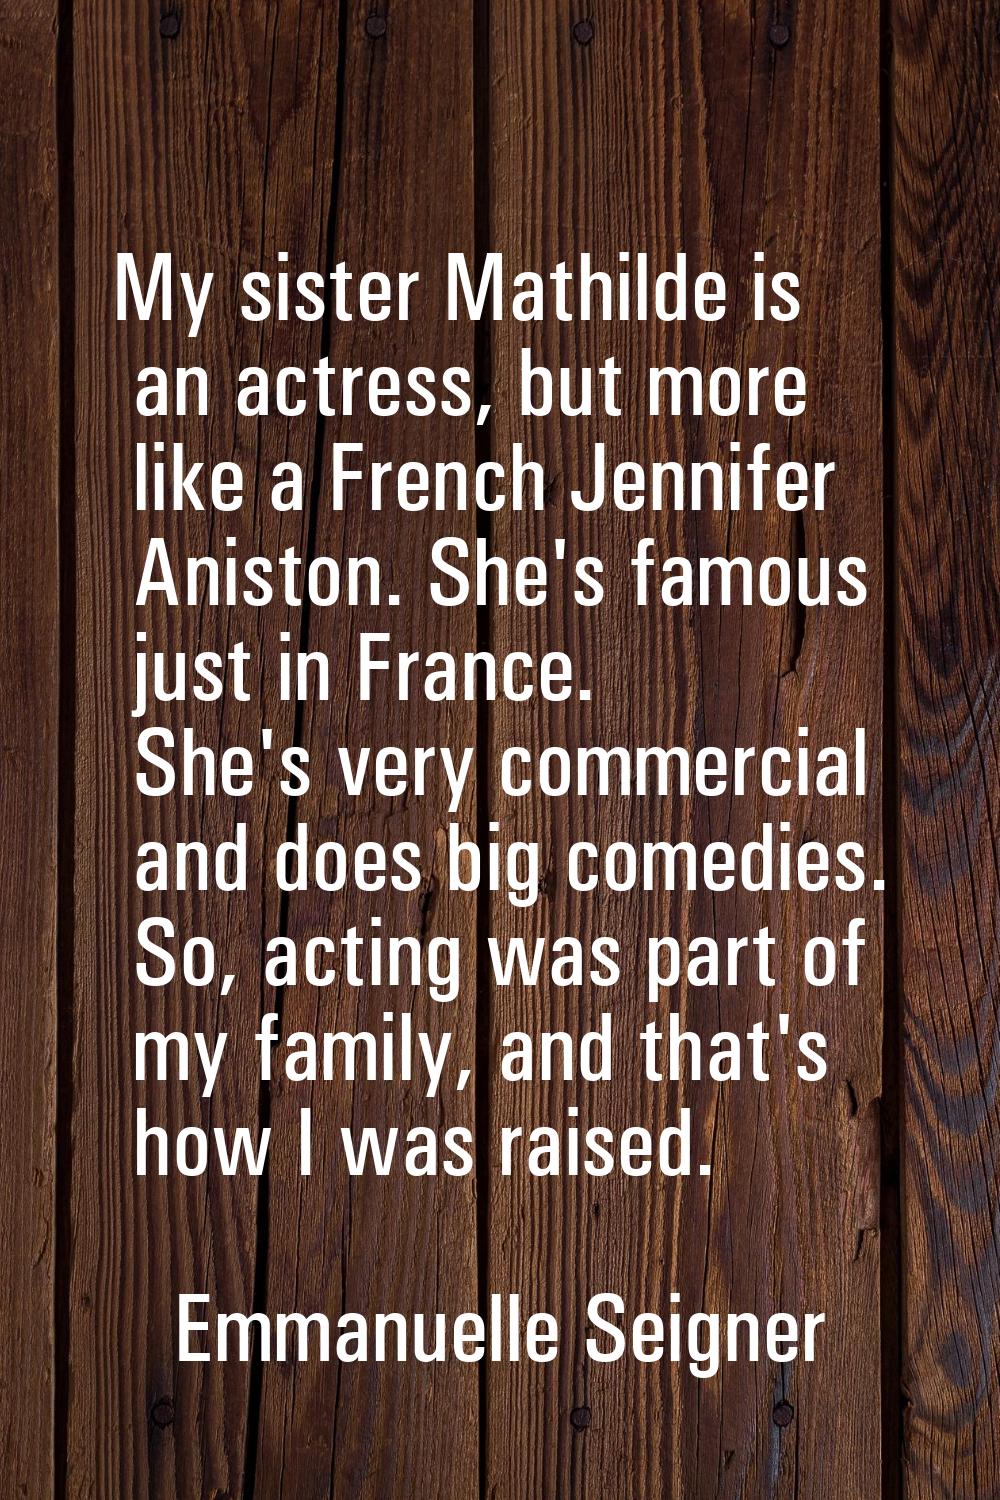 My sister Mathilde is an actress, but more like a French Jennifer Aniston. She's famous just in Fra